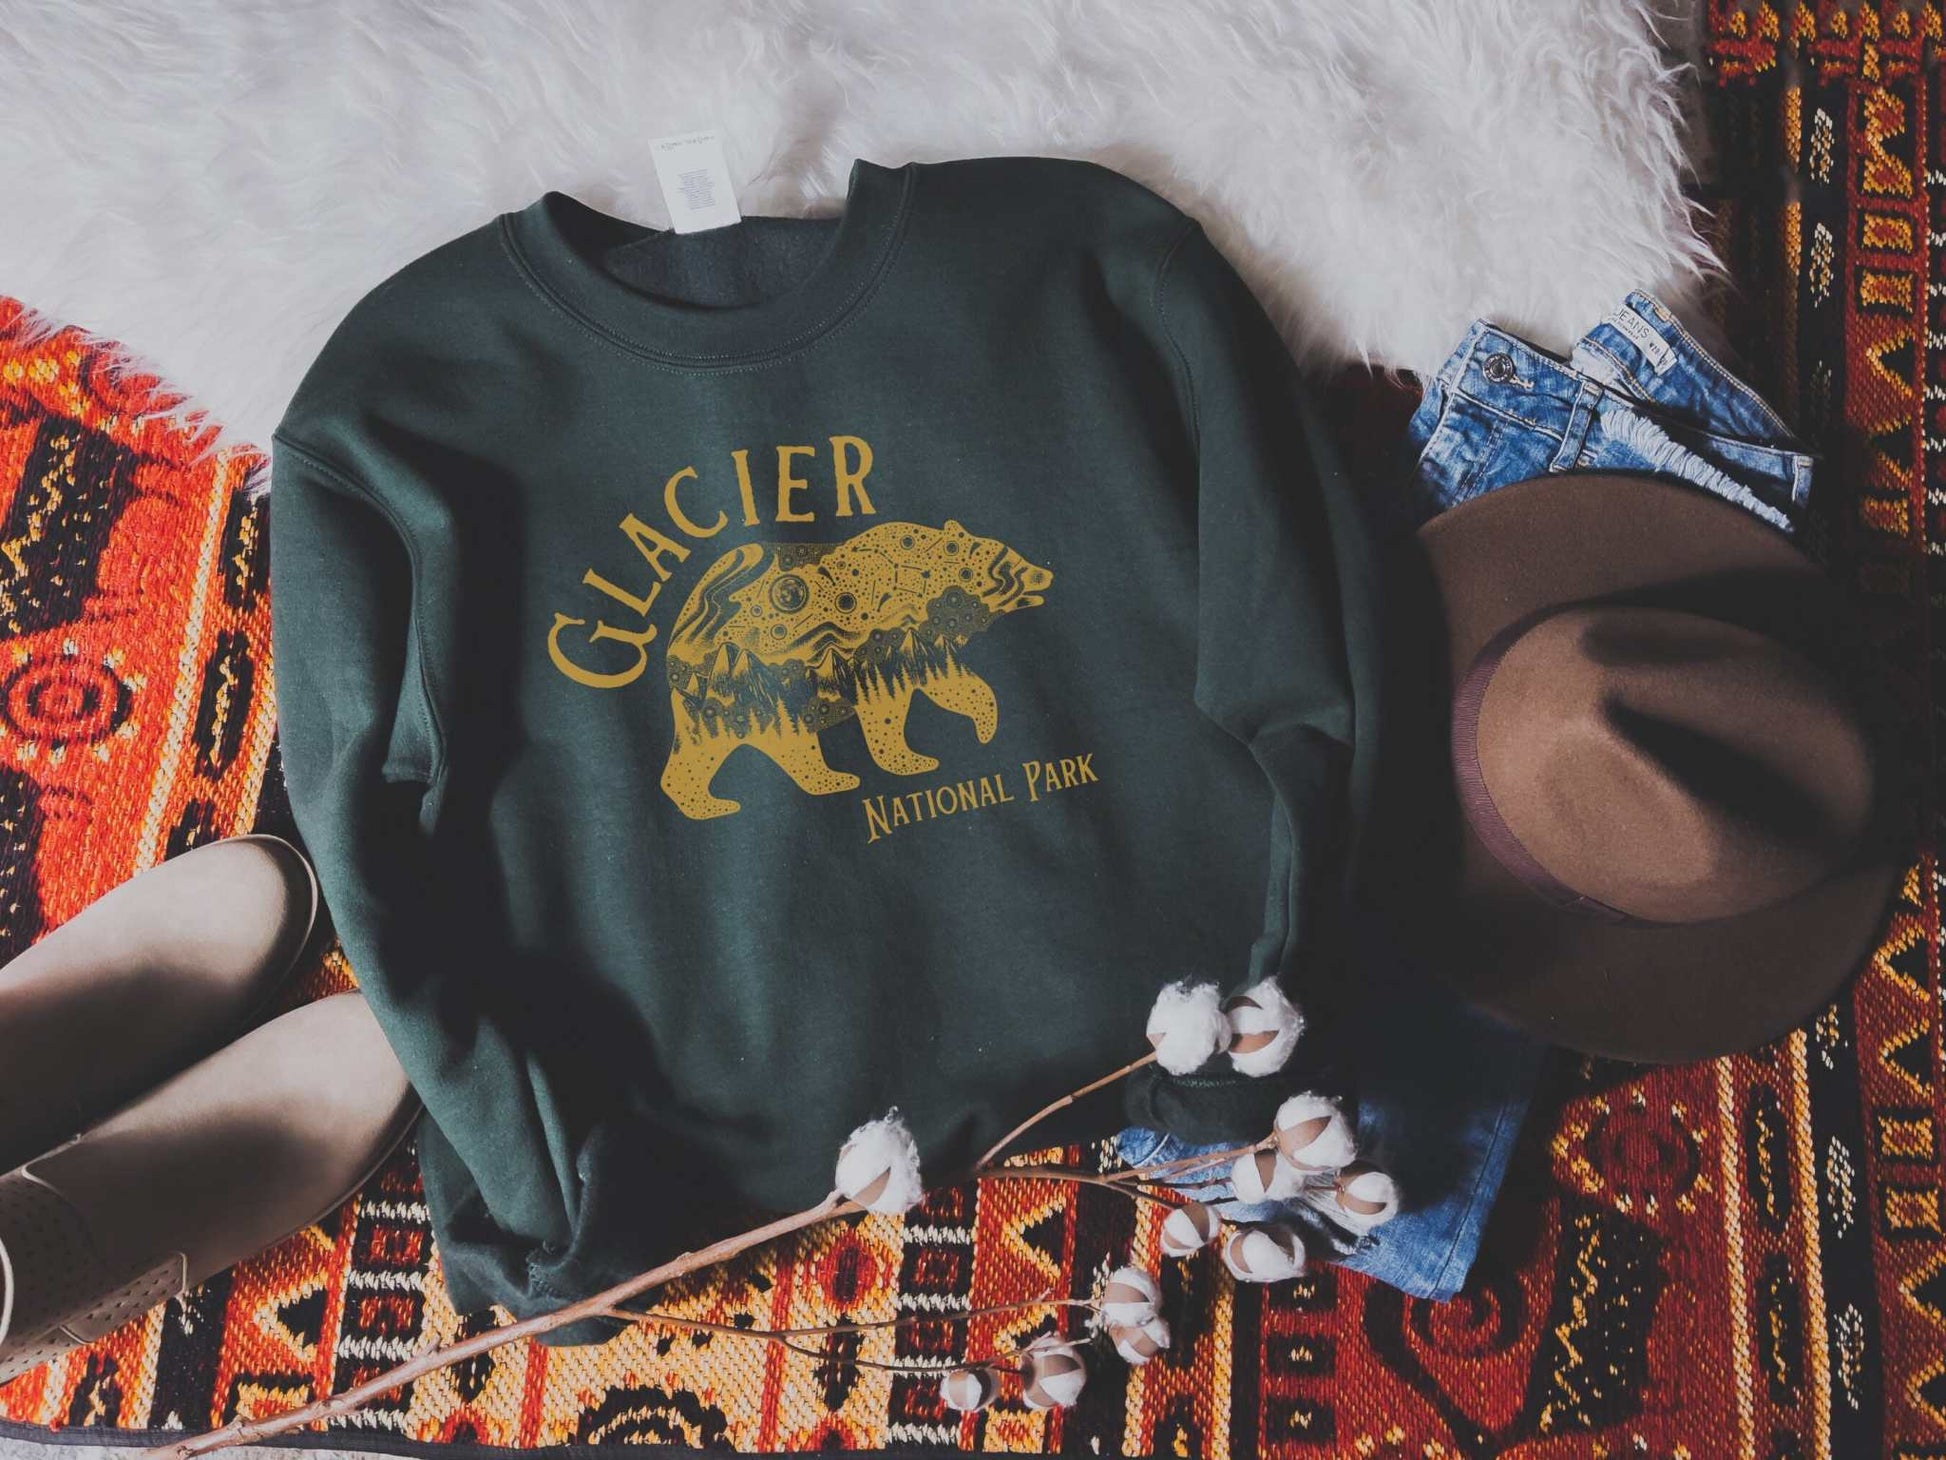 Glacier National Park Galaxy Bear SweatshirtBring the magic and beauty of Glacier National Park at night into your sweater rotation with this crewneck galaxy grizzly bear sweatshirt inspired by the midnight ma